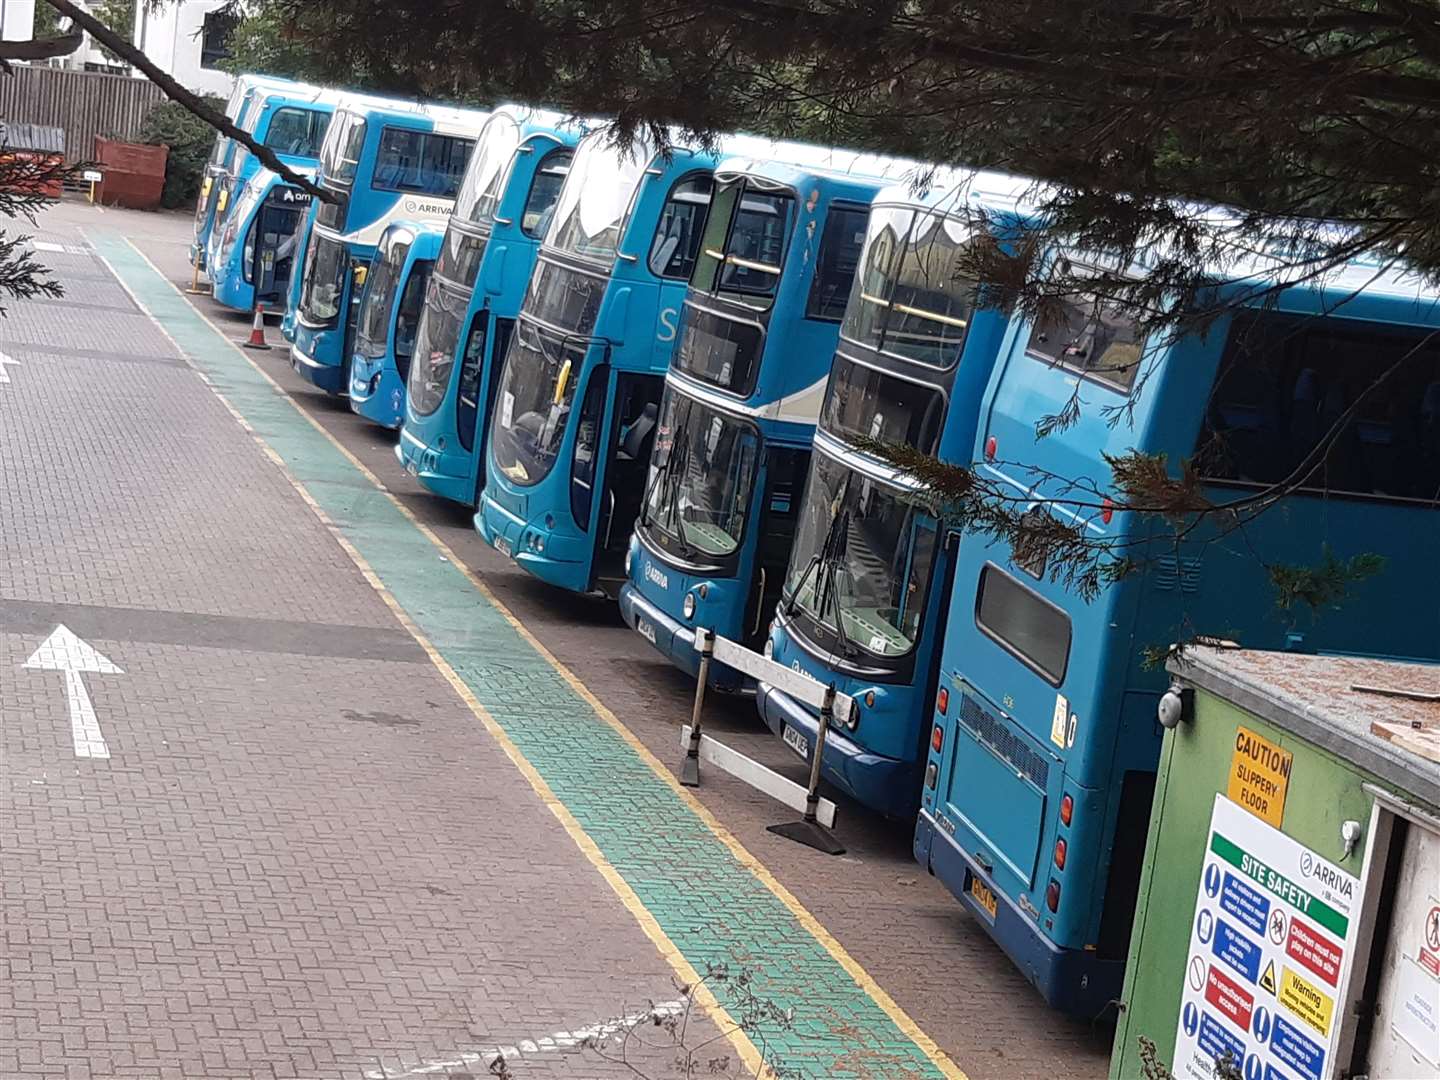 There is a real prospect of Arriva buses stuck in their depots with non-one to drive them